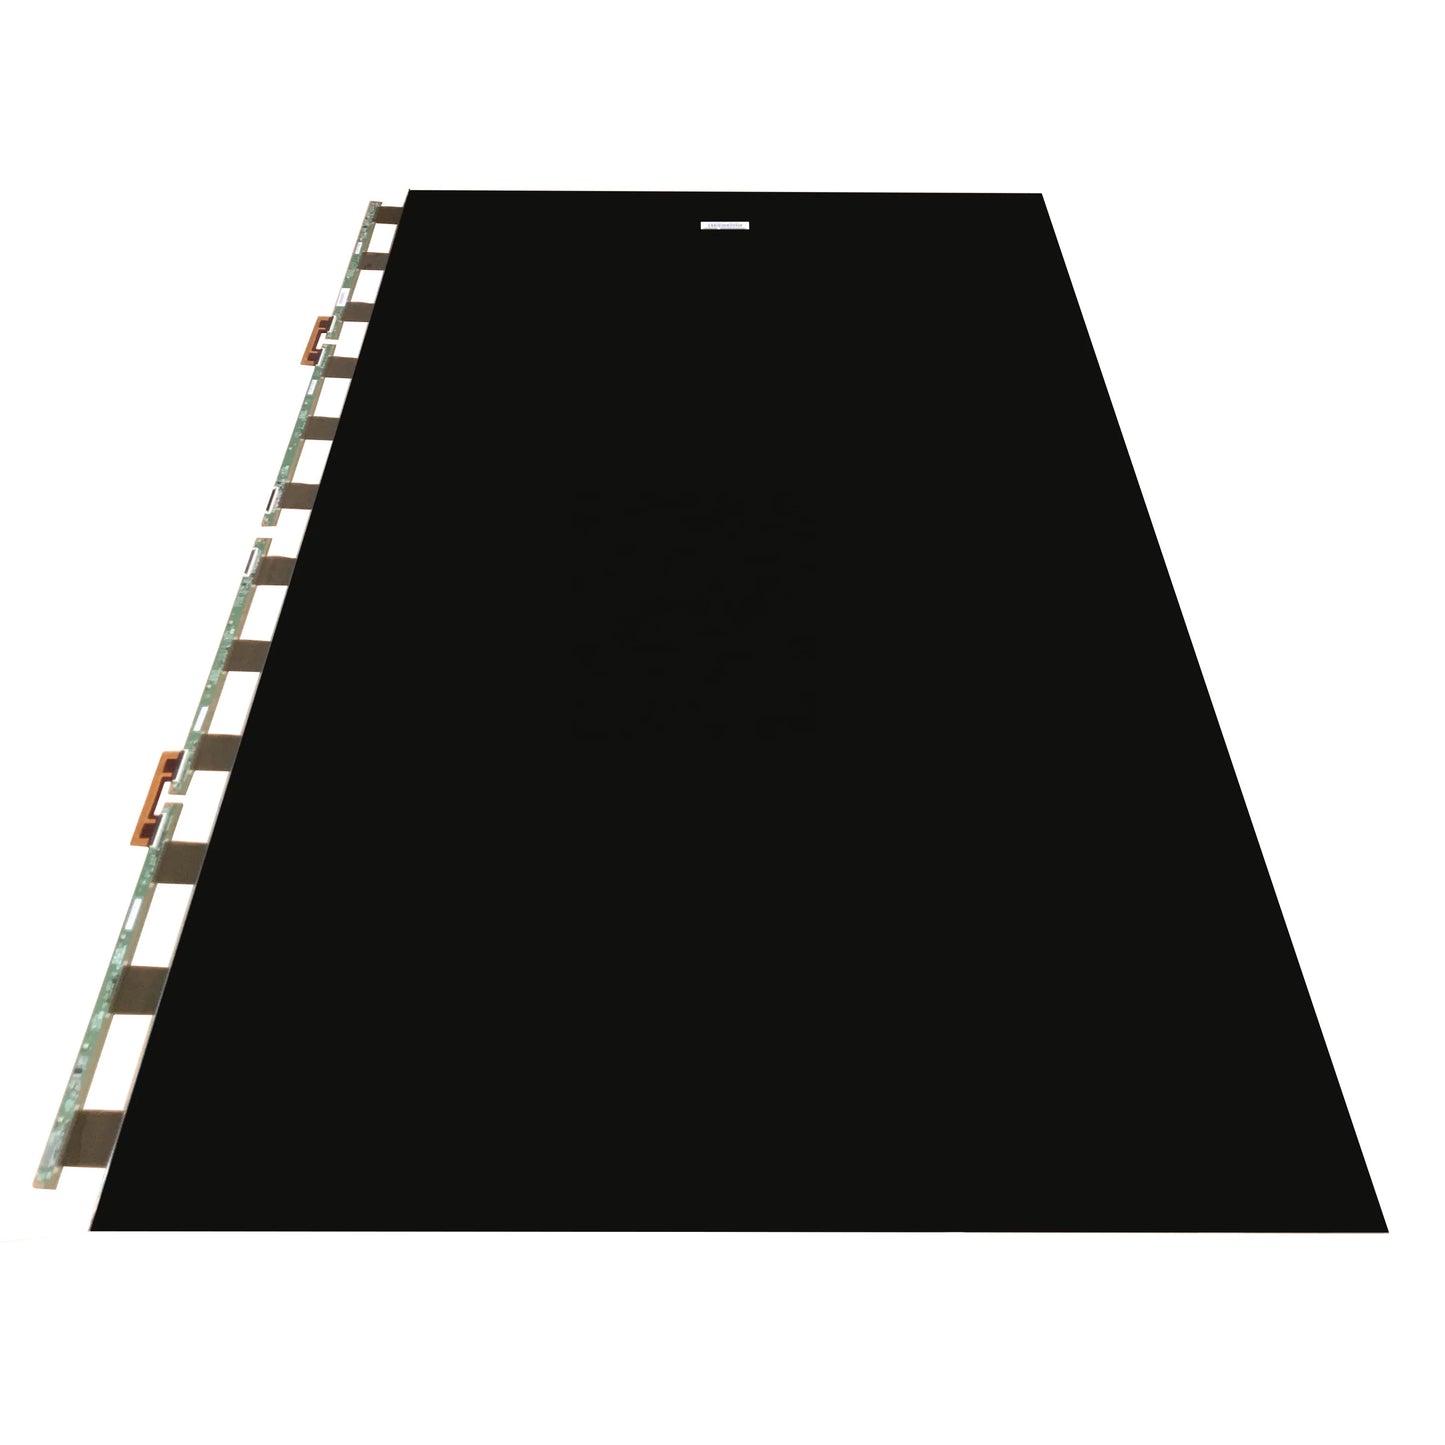 HV650QUB-N9D 136 pins BOE 65" inch LCD LED TFT Display Open Cell TV Screen Spare Panel Replacement Parts for TV Repair